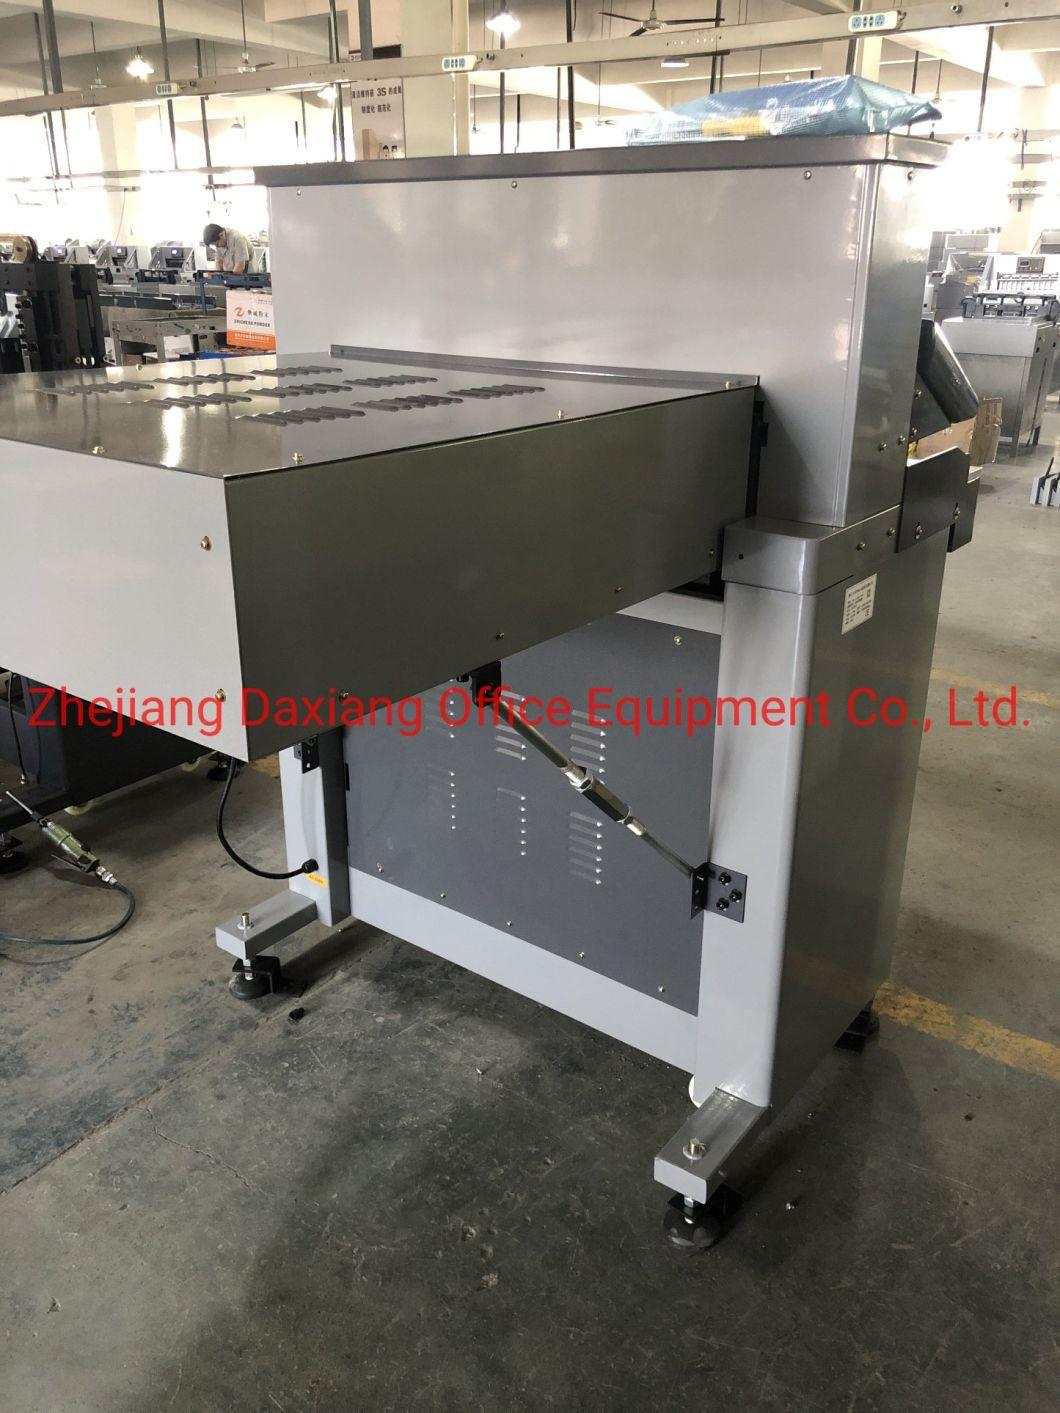 Paper Cutting Machine with 13 Months Warranty 520mm Hydraulic Guillotine Fn-H520t V7